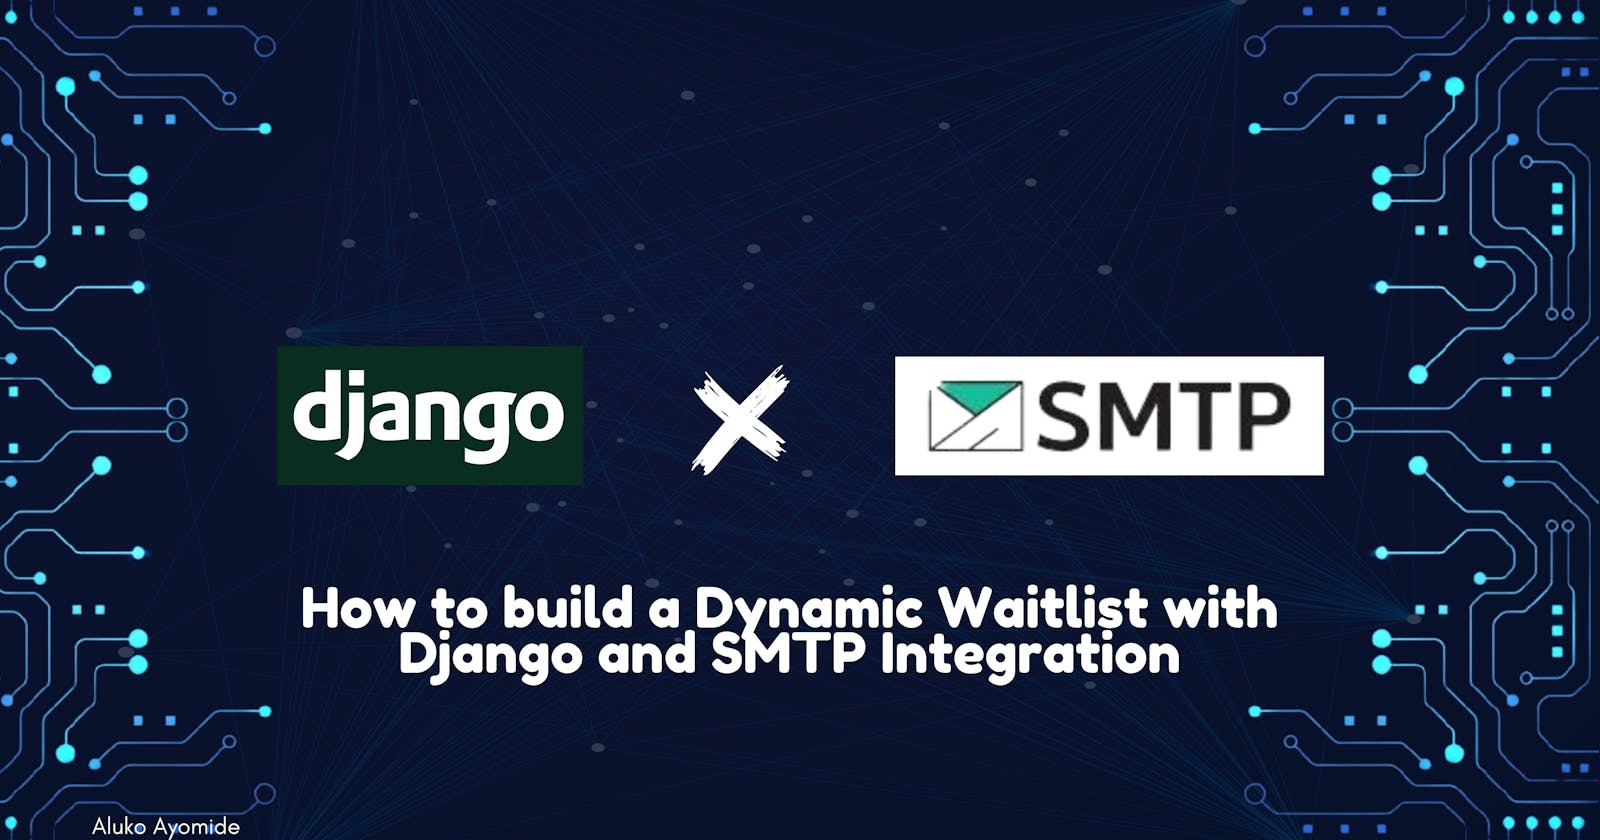 How to build a Dynamic Waitlist with Django and SMTP Integration